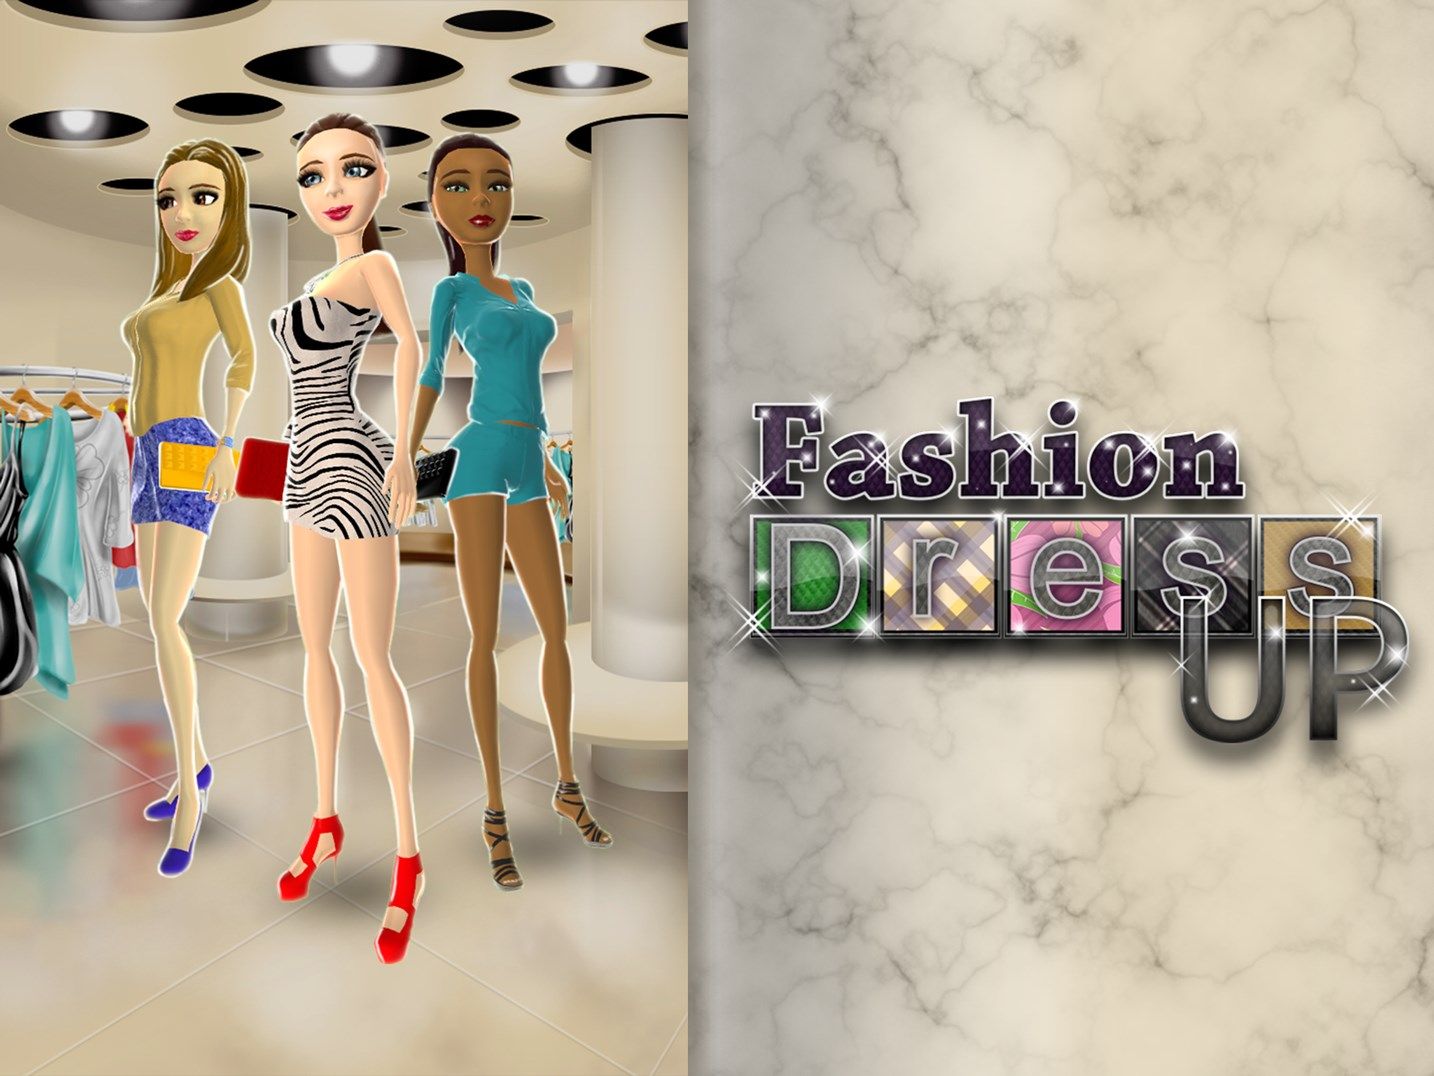 Top Fashion Dress up game for girls!